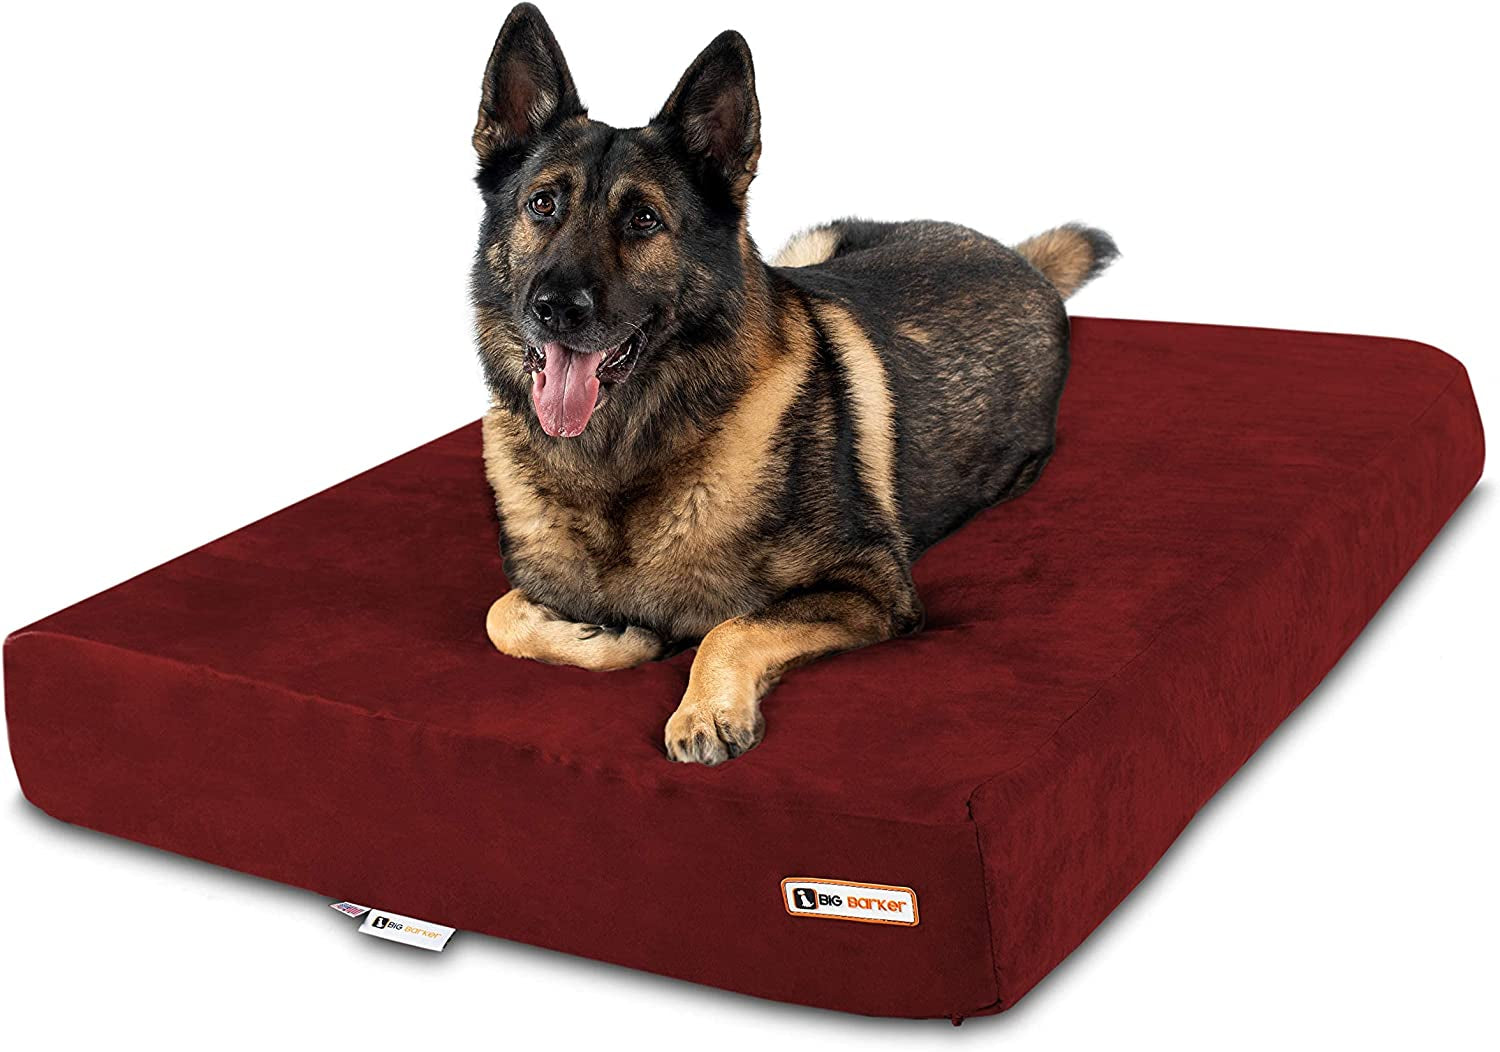 Sleek Orthopedic Dog Bed - 7” Dog Sofa Bed for Large Dogs W/Washable Microsuede Cover - Sleek Elevated Dog Bed Made in the USA W/ 10-Year Warranty (Sleek, XL, Burgundy)